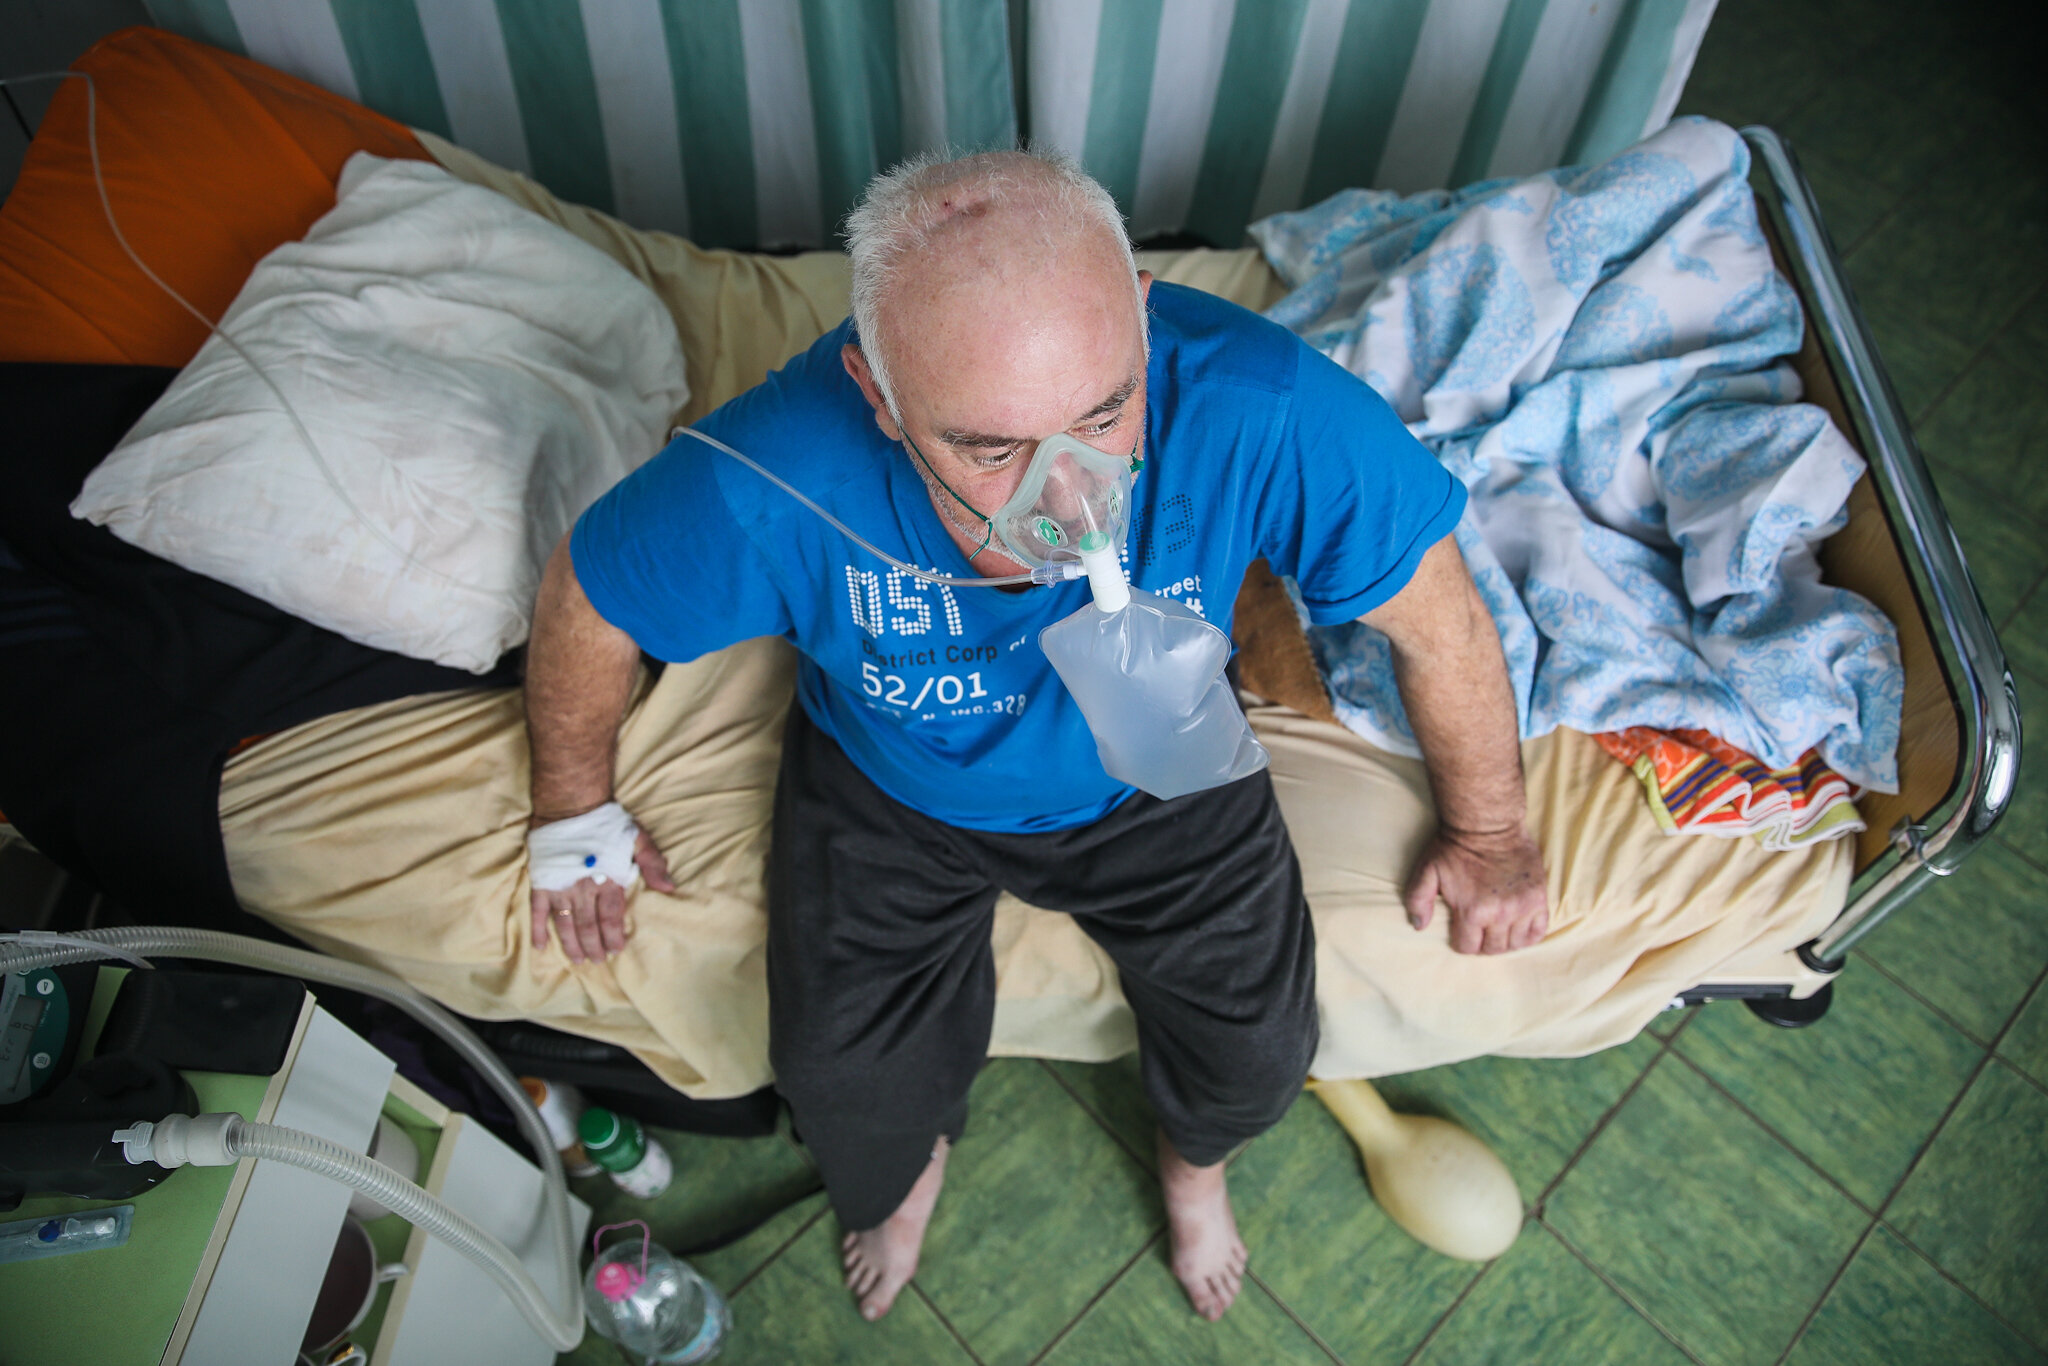 57-year-old Vasyl Stefurak sits on his hospital bed at Kolomyia District Hospital in Ivano-Frankivsk Oblast on March 16, 2021.